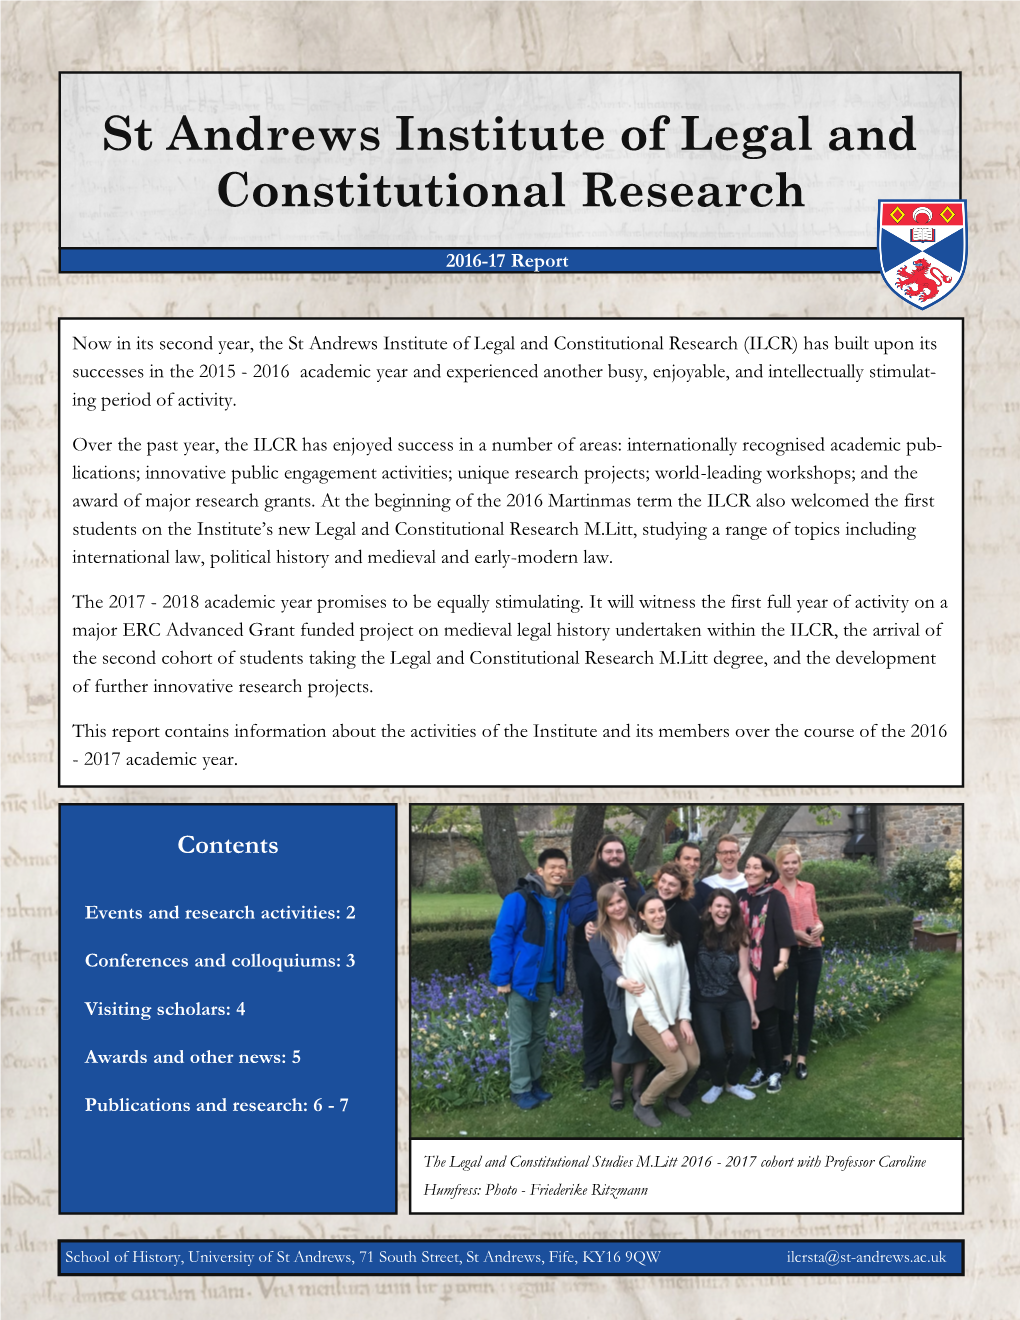 St Andrews Institute of Legal and Constitutional Research